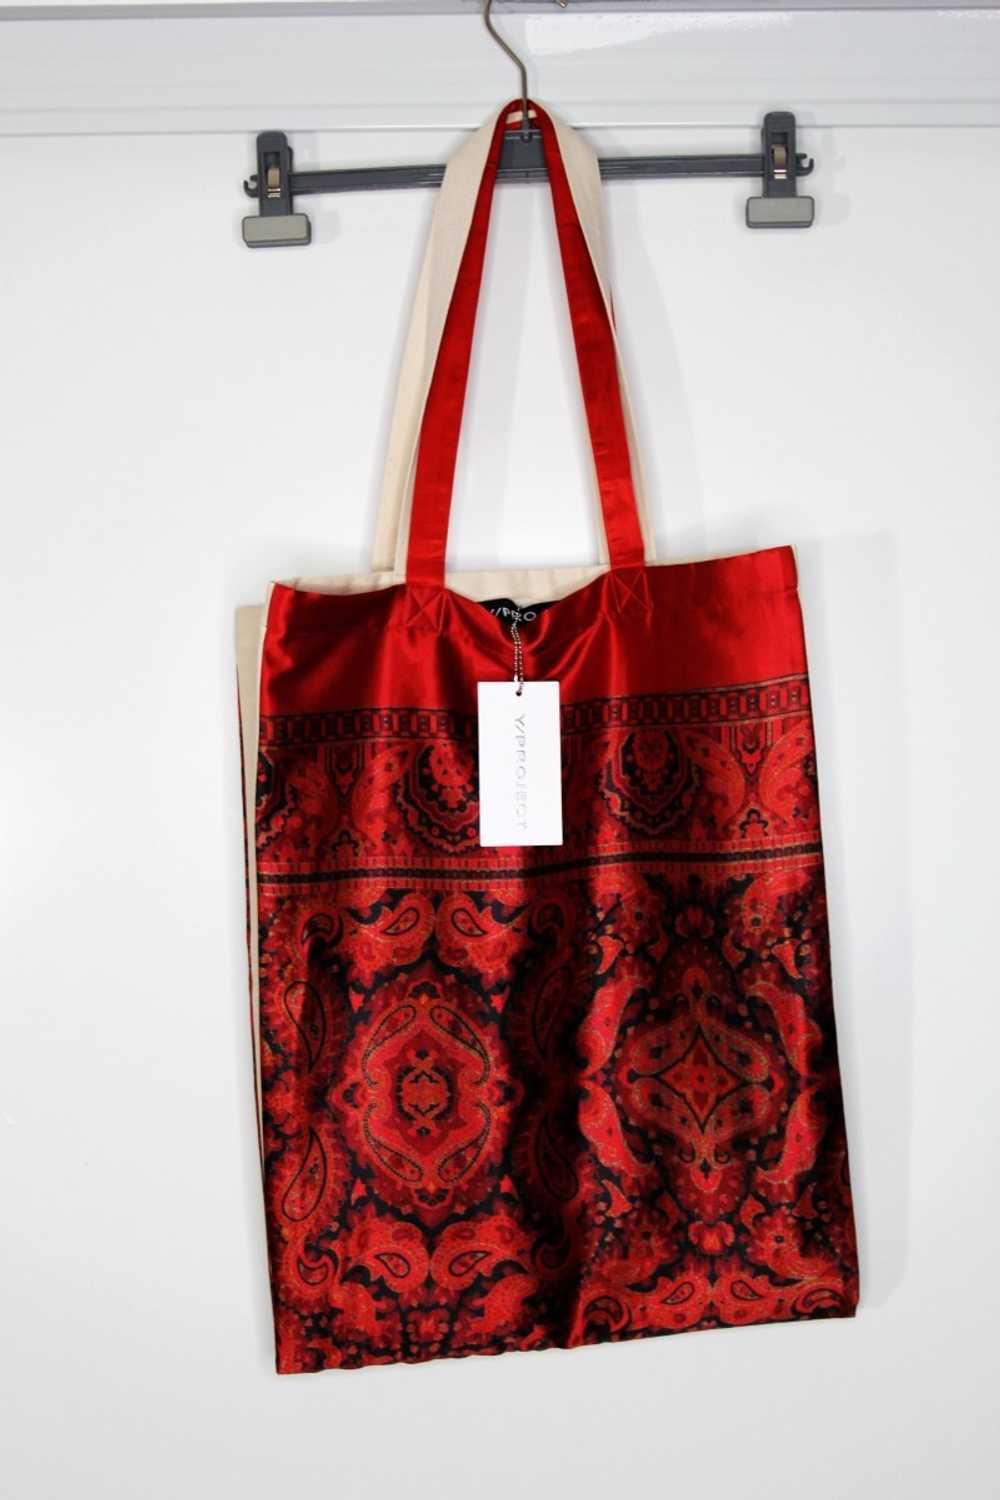 BNWT AW20 Y/PROJECT SCARF TOTE BAG - image 2